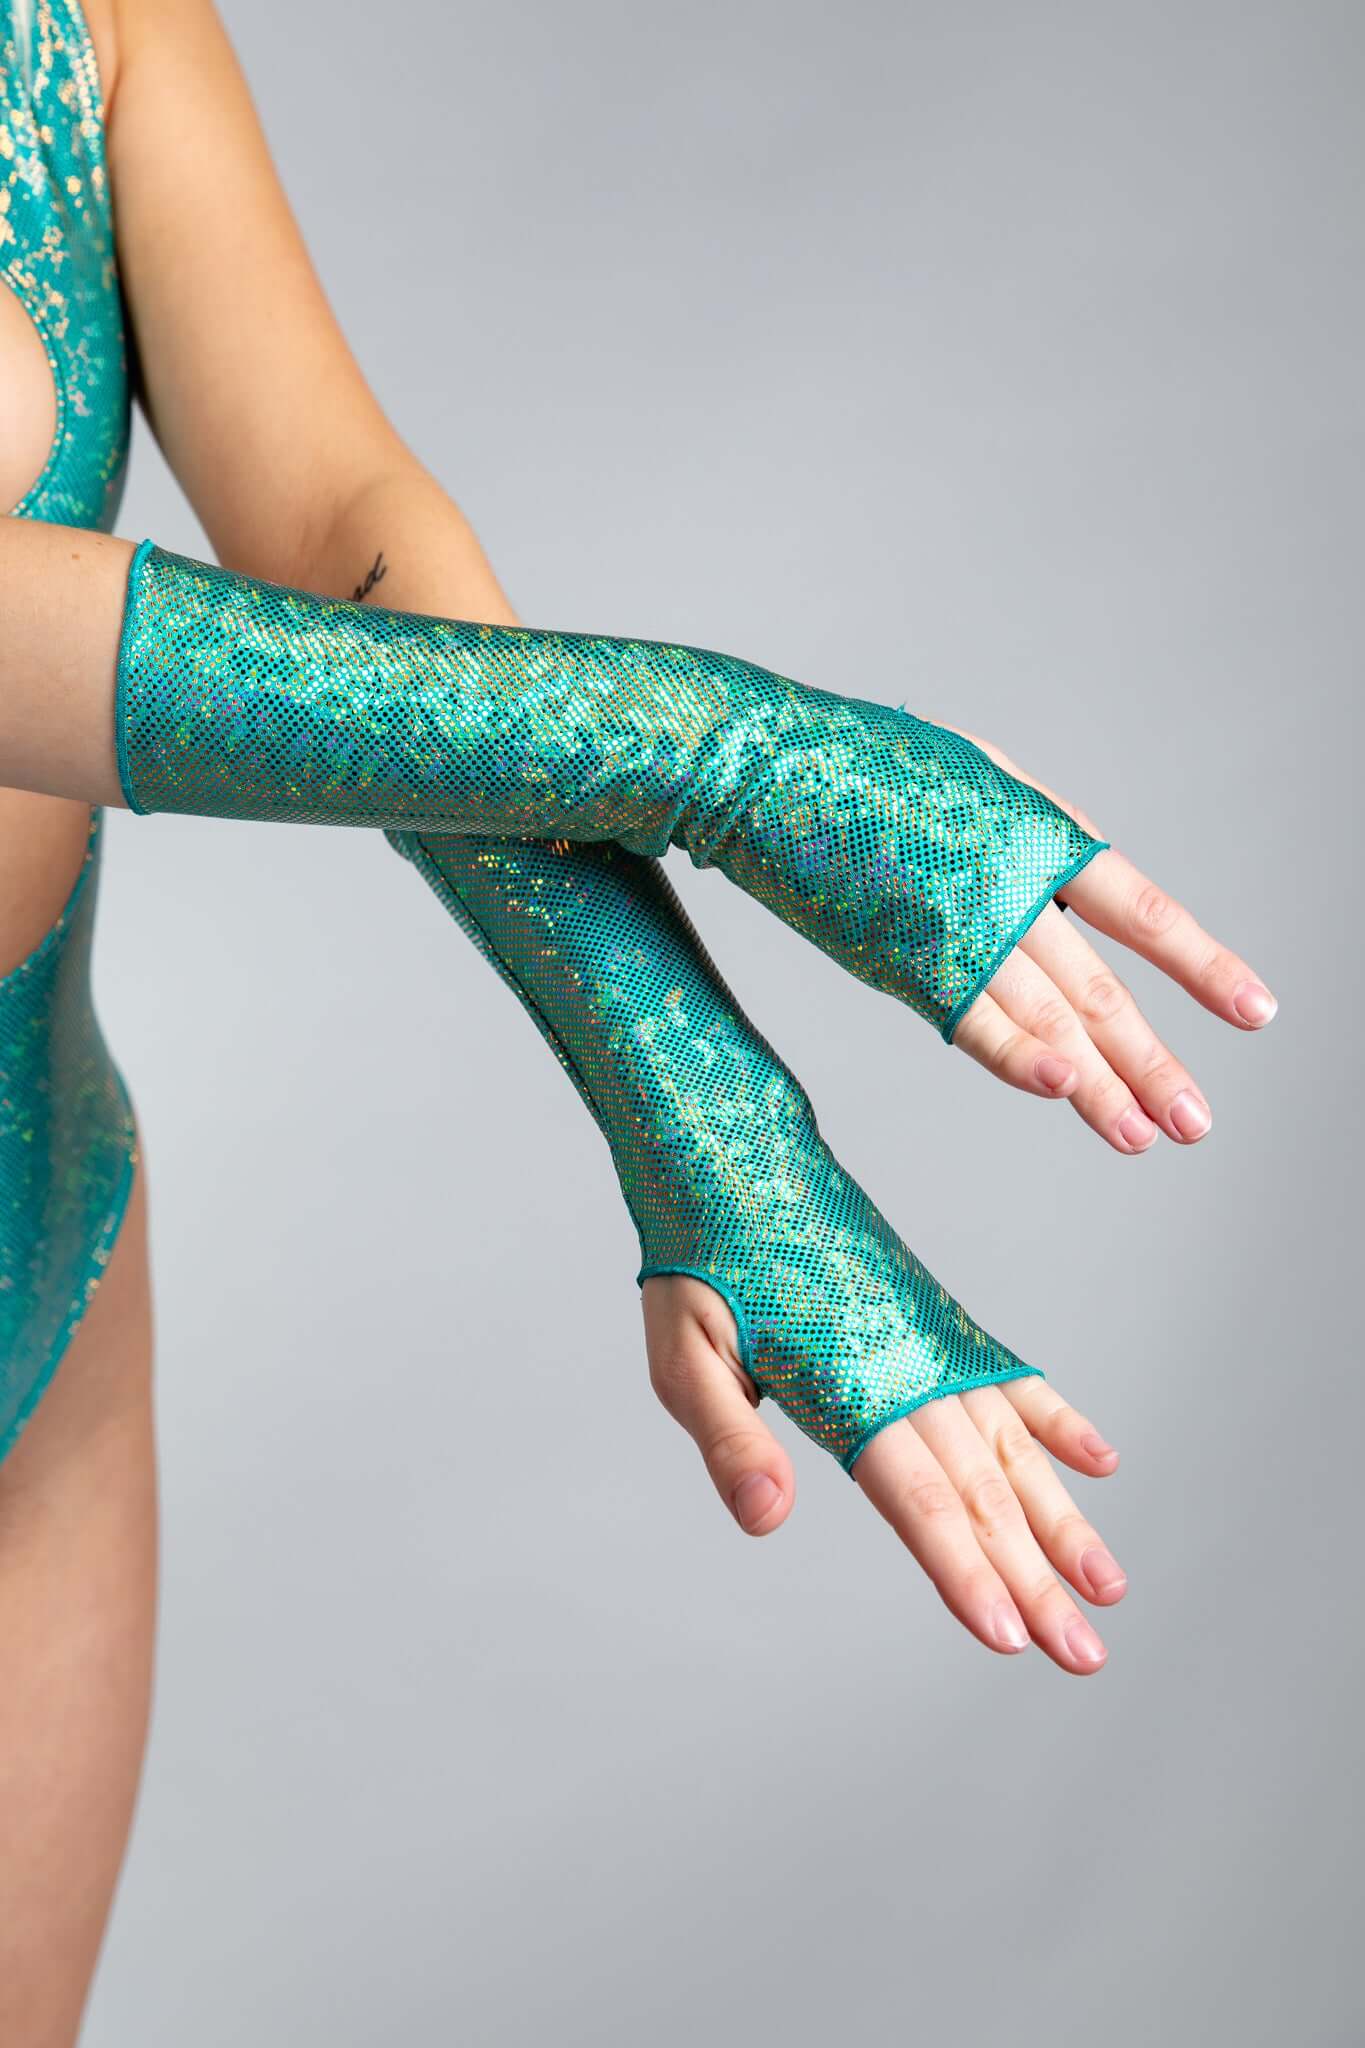 A woman's hands, crossed at the wrists, wearing holographic teal gloves.